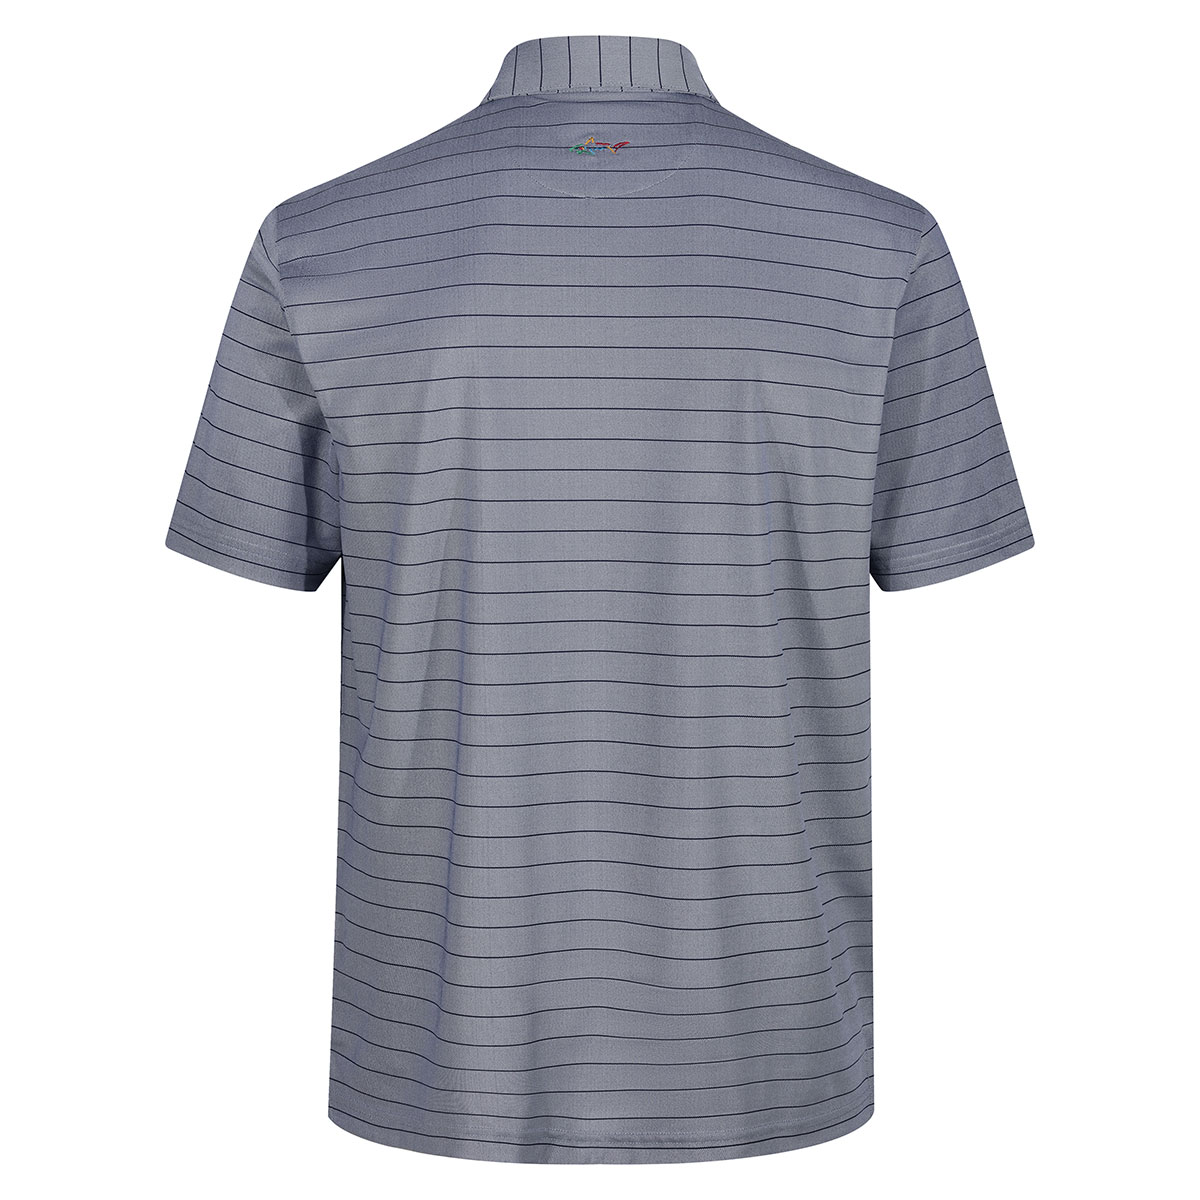 Greg Norman Men's Freedom Micro Golf Polo Shirt from american golf